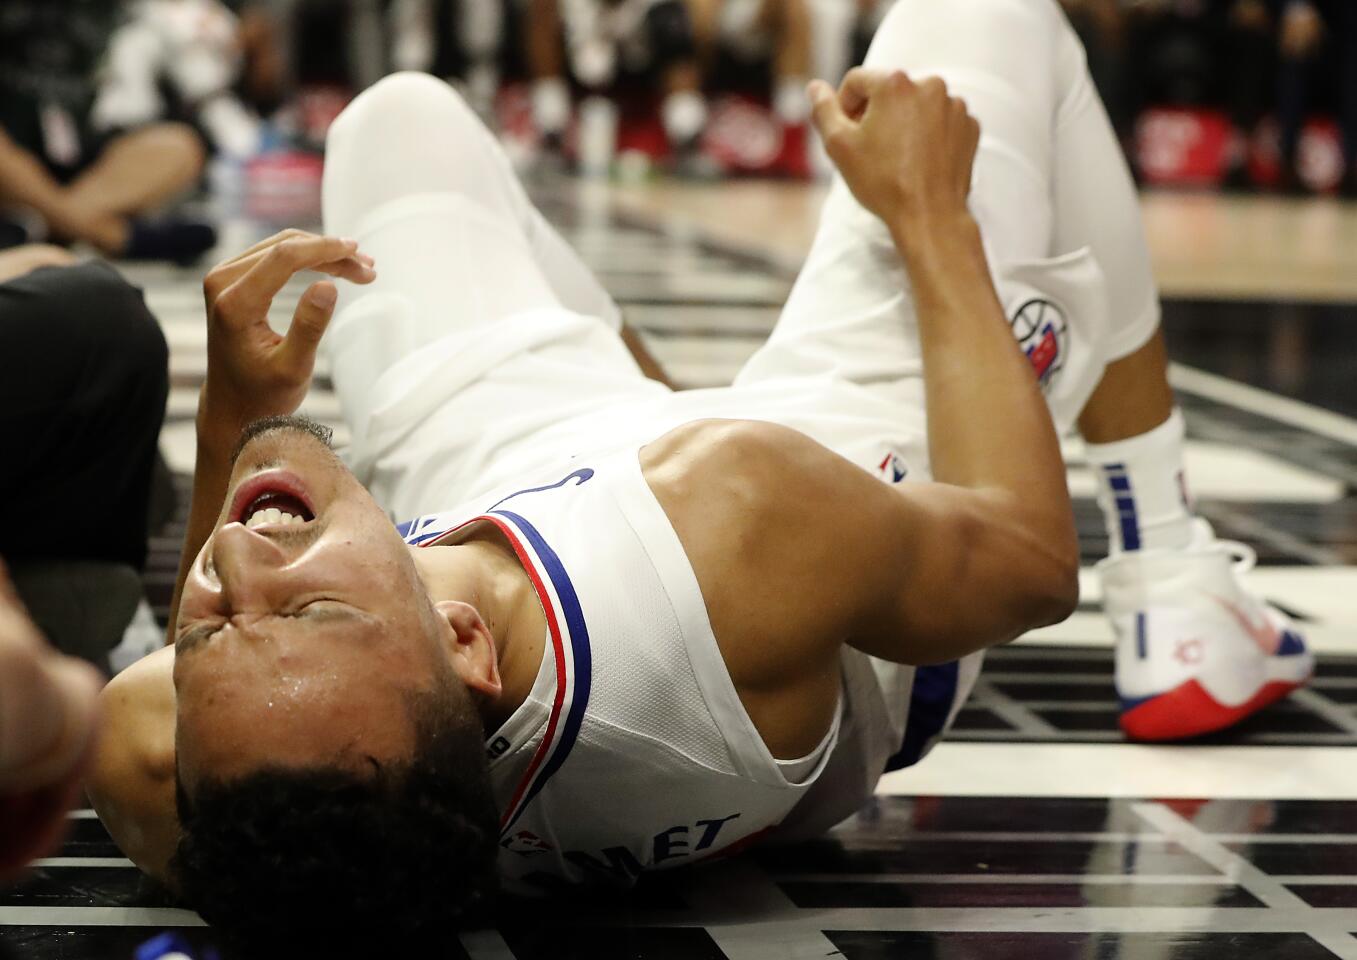 Clippers guard Landry Shamet writhes in pain after injuring his left ankle during the third quarter of a game against the Raptors on Nov. 11 at Staples Center.